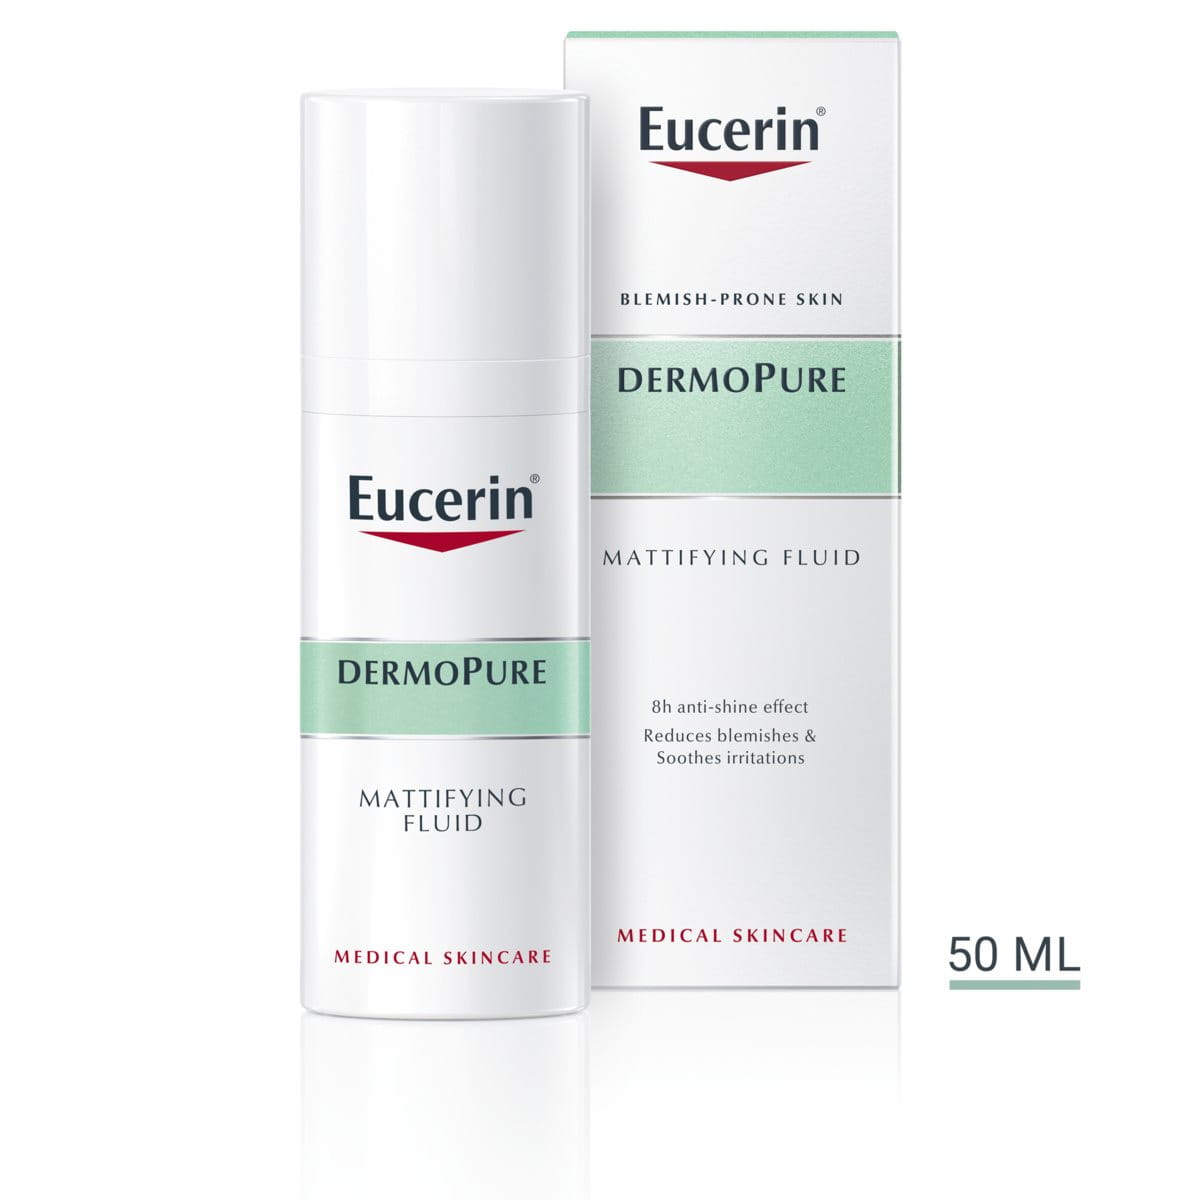 A mattifying fluid for acne-prone with an 8 hour anti-shine effect that helps reduce blemishes and diminishes excess sebum